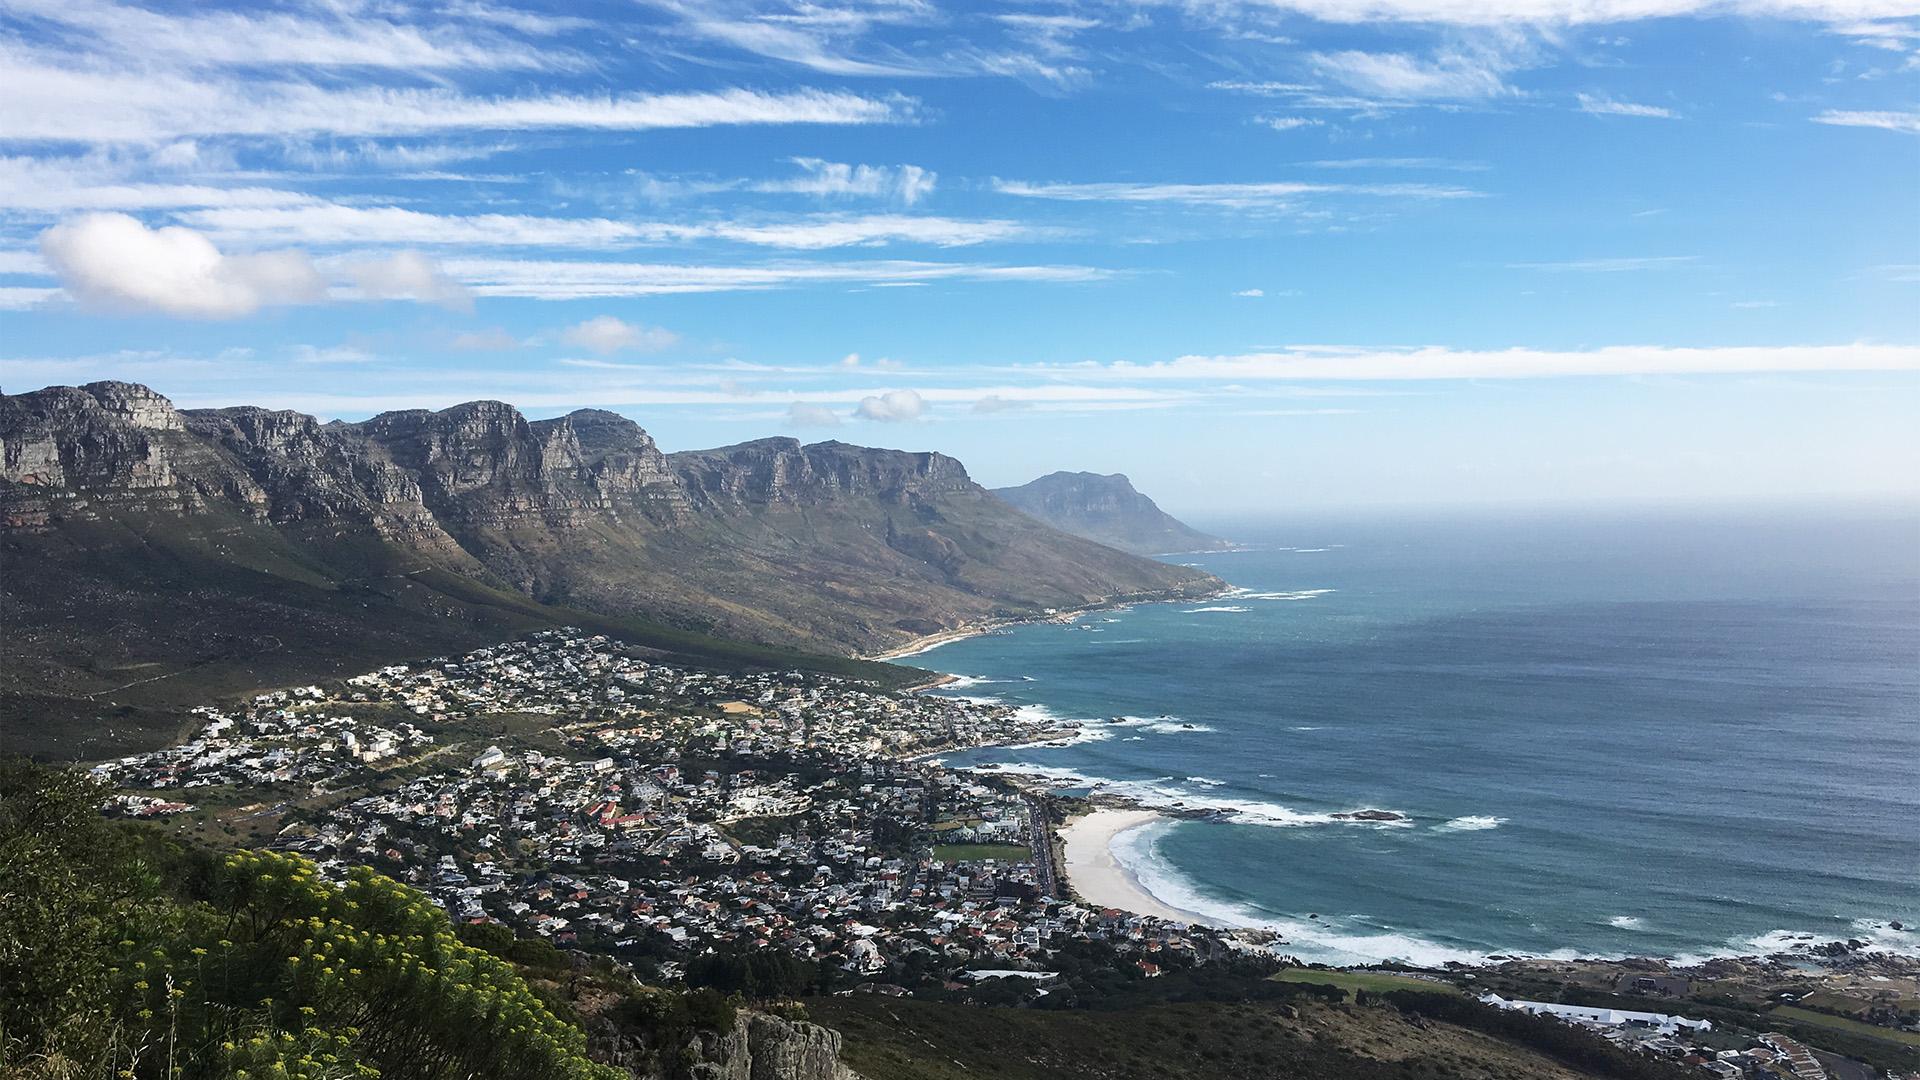 A view of Table Mountain and the beach from atop Lion’s Head